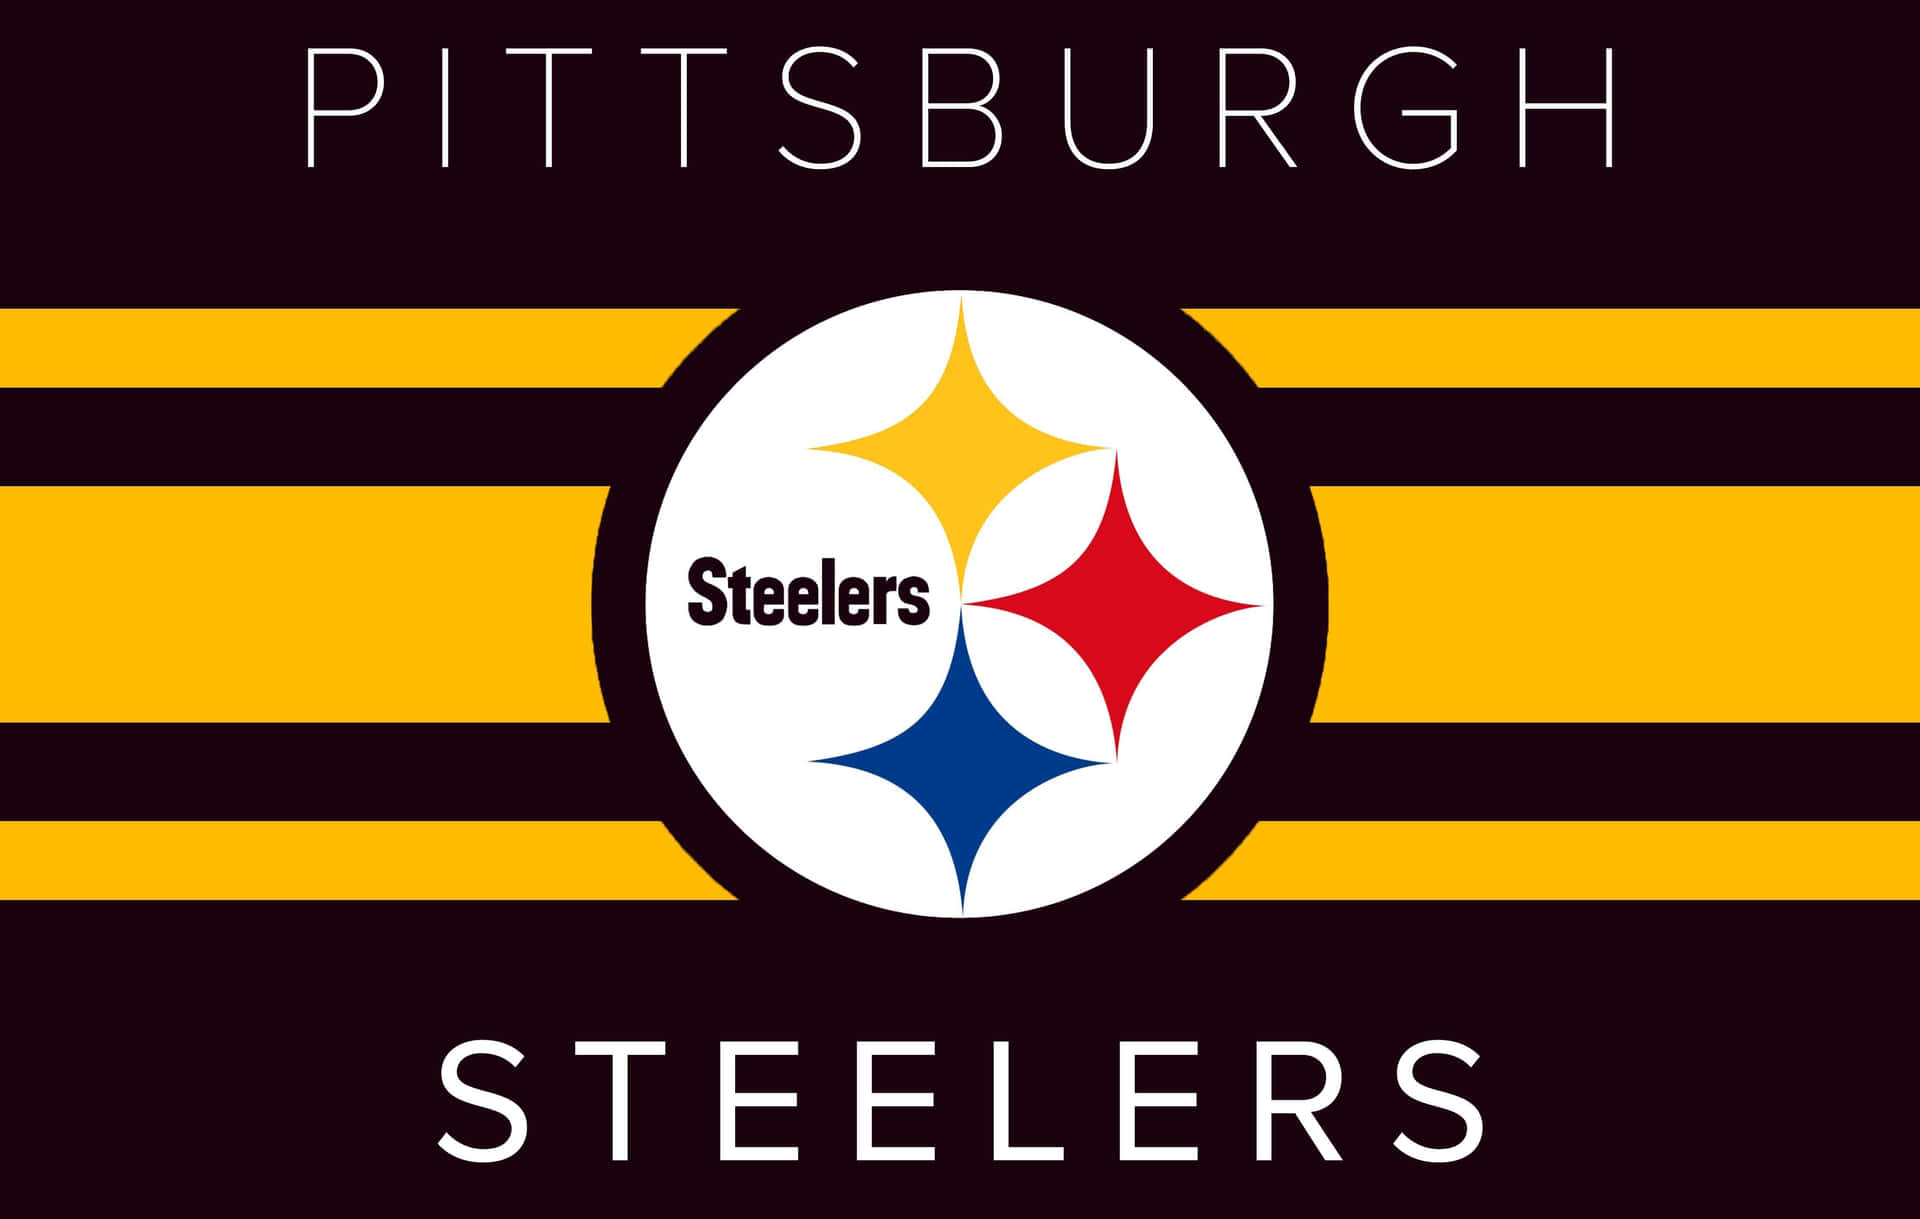 Download Pittsburgh Steelers Logo And Flag Wallpaper